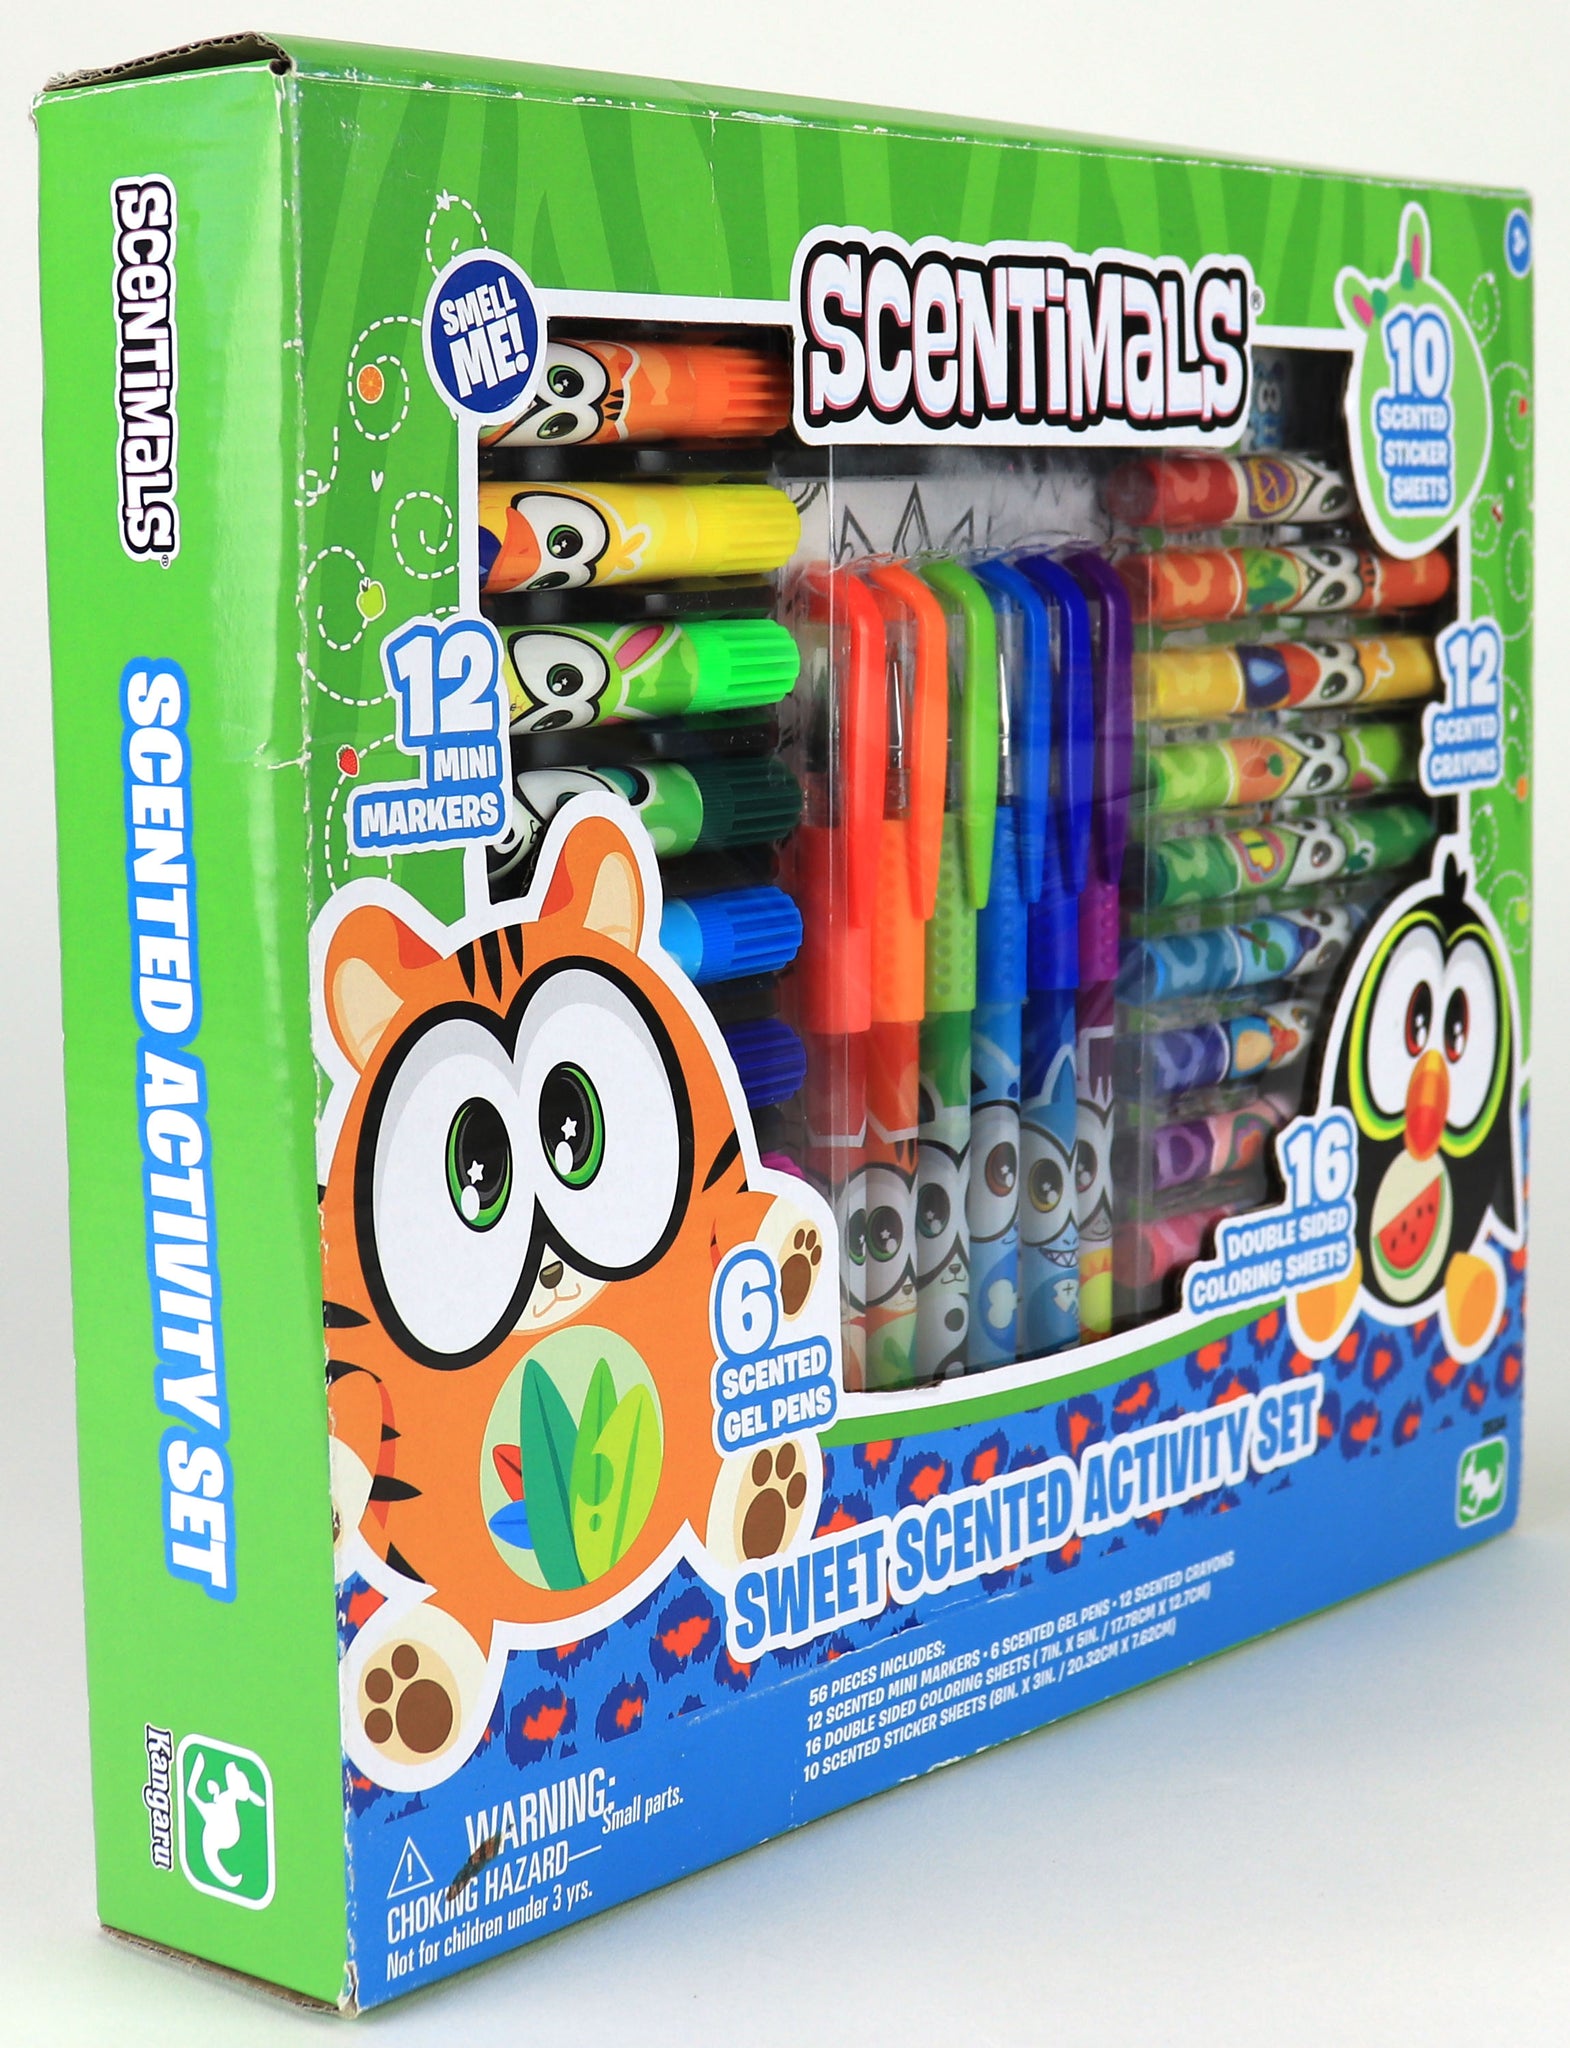 Scentimals Scented Gel Pens + Markers + Large pen + notebooks Pink Lot